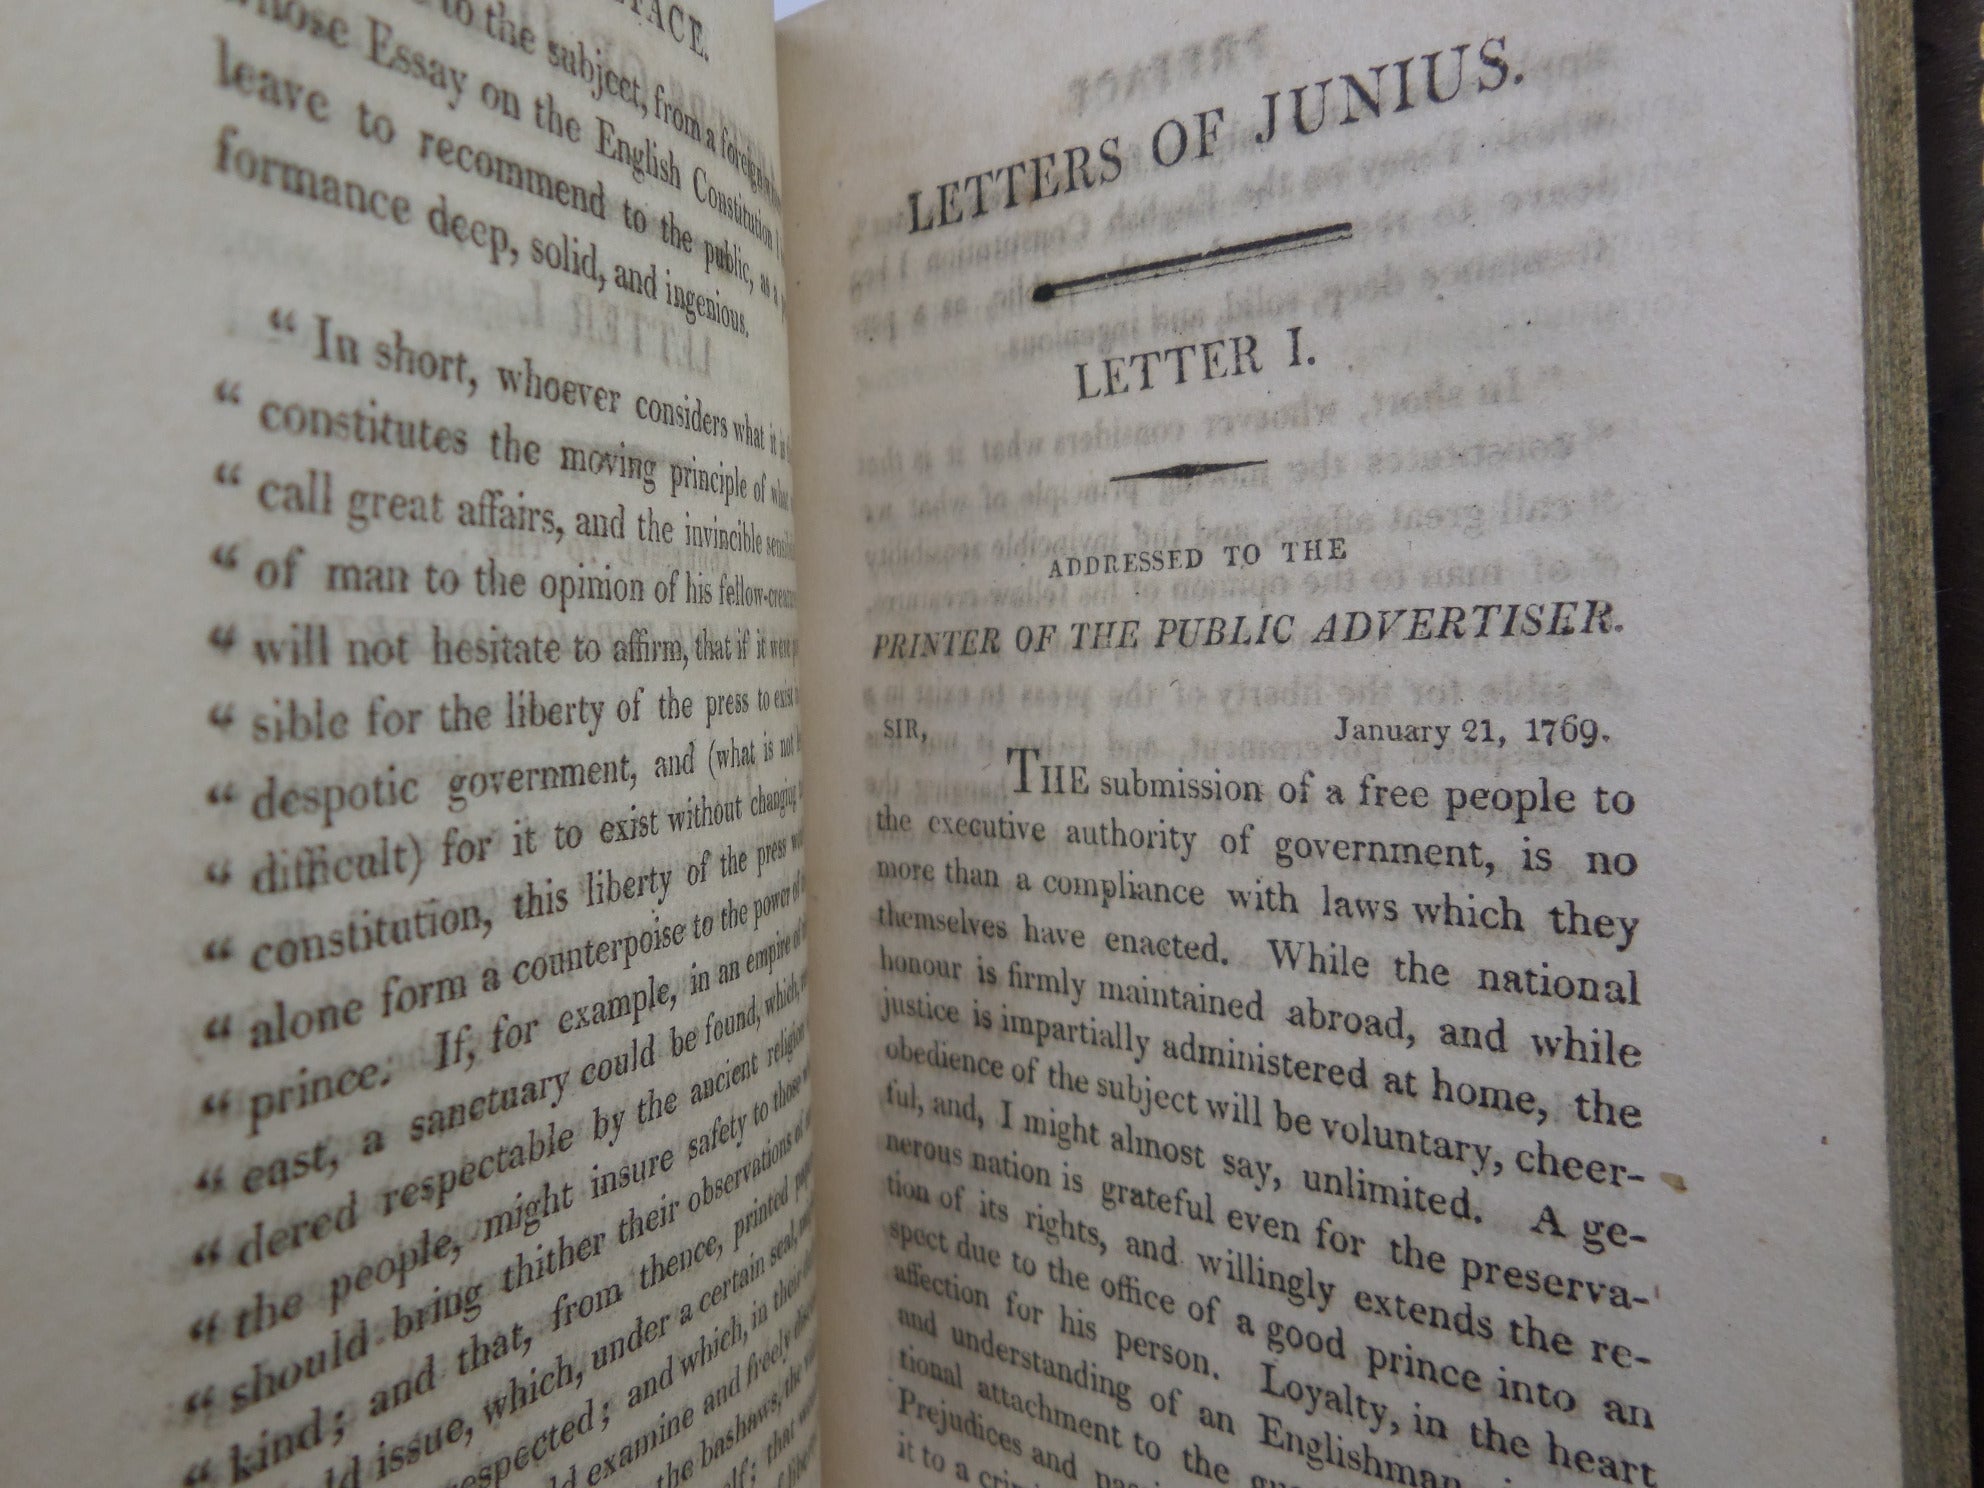 THE LETTERS OF JUNIUS 1804 FINE LEATHER BINDING